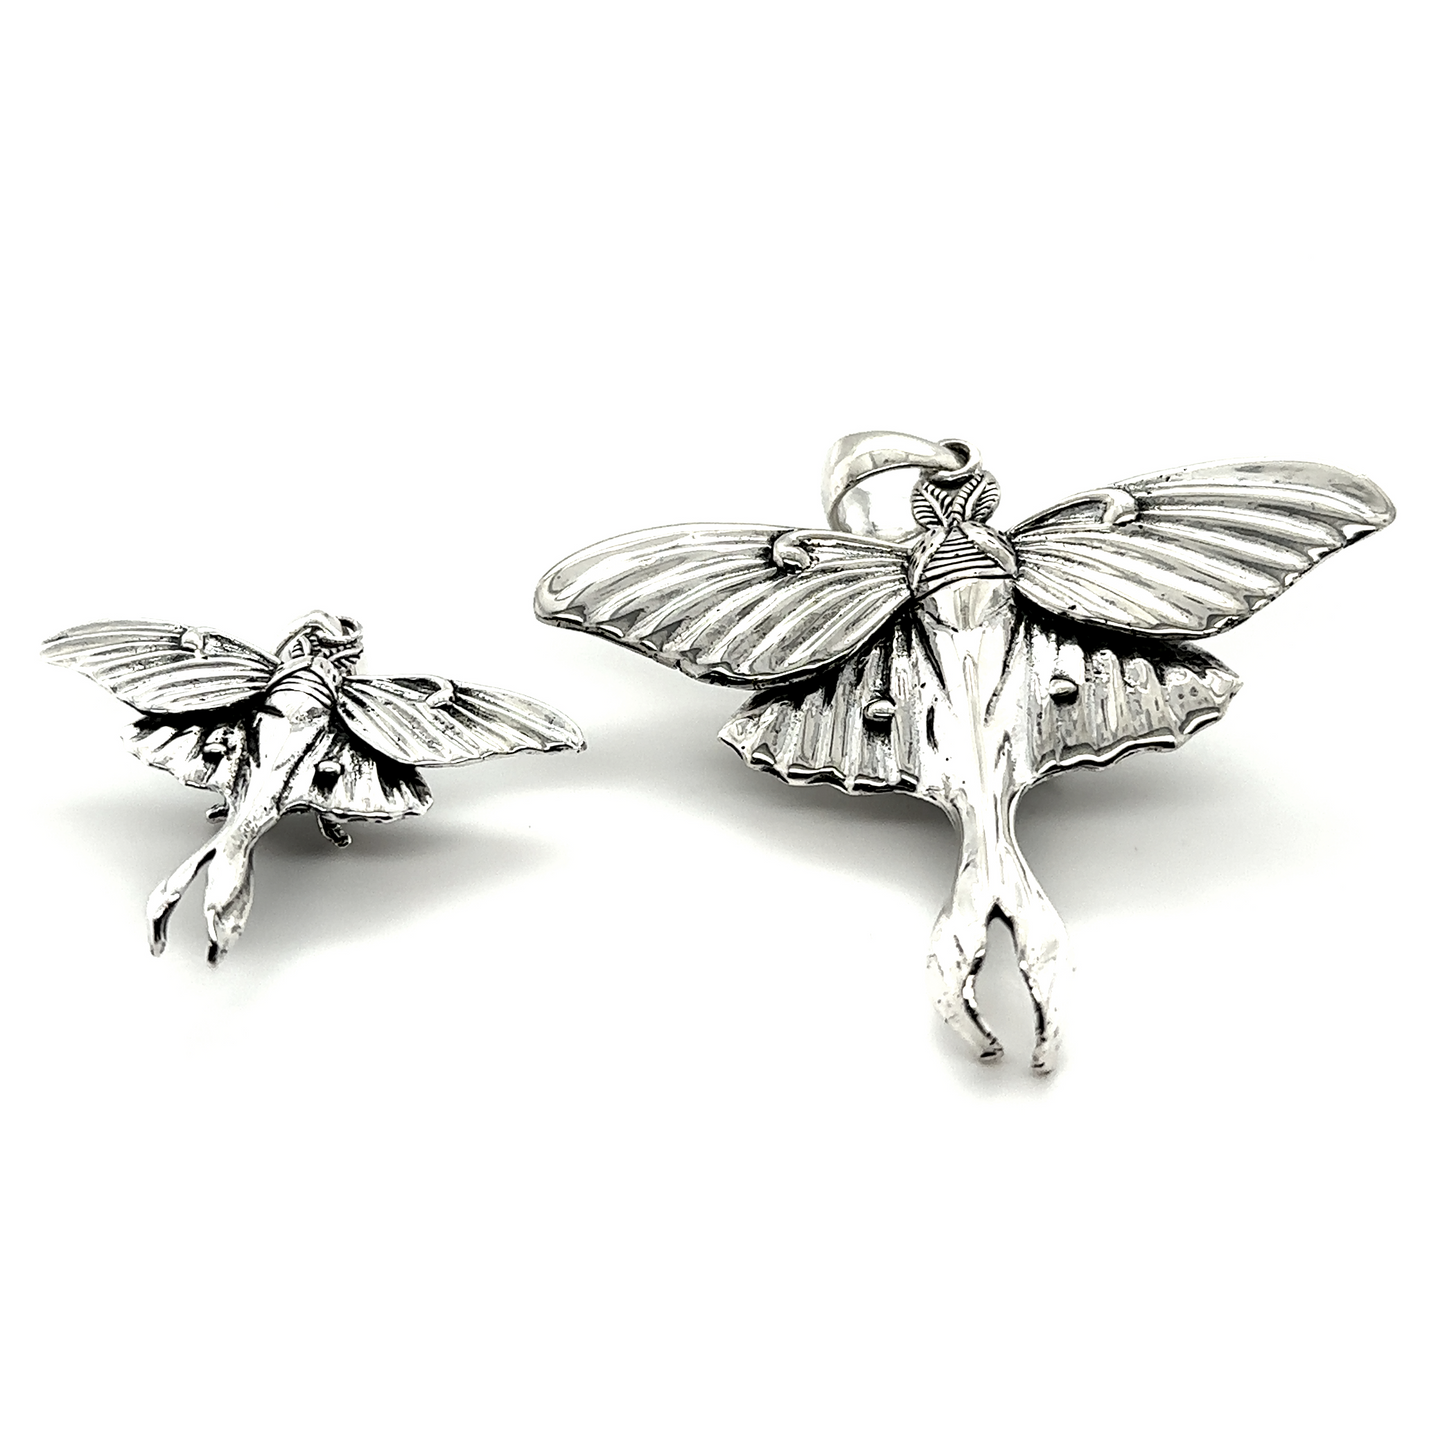 Two Statement Lunar Moth Pendants by Super Silver with wings that symbolize transformation.